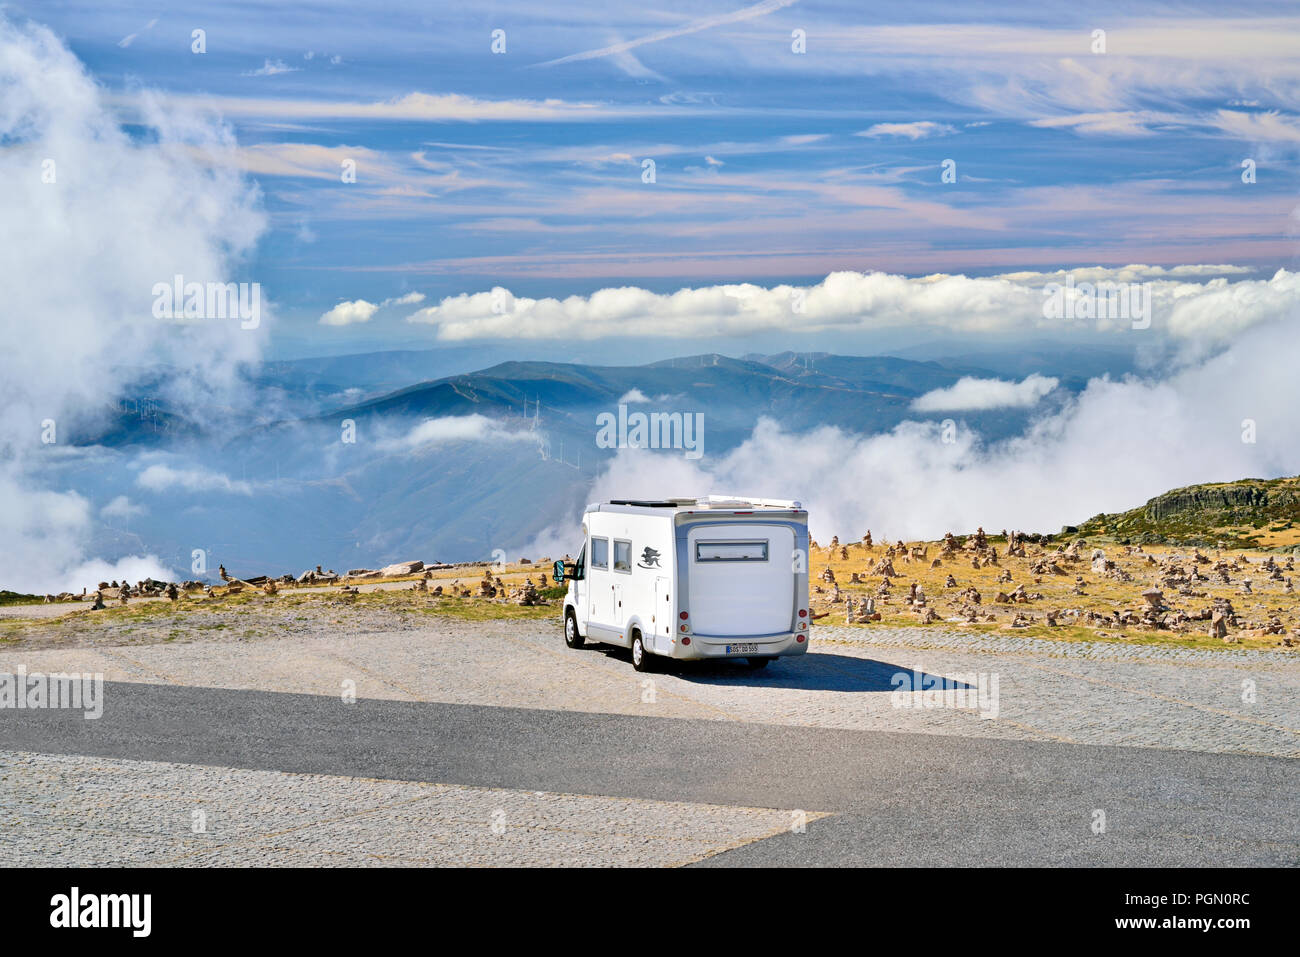 Motor Home parking alone on an asphalt parking lot with view to mountains sunnrounded by thick clouds Stock Photo